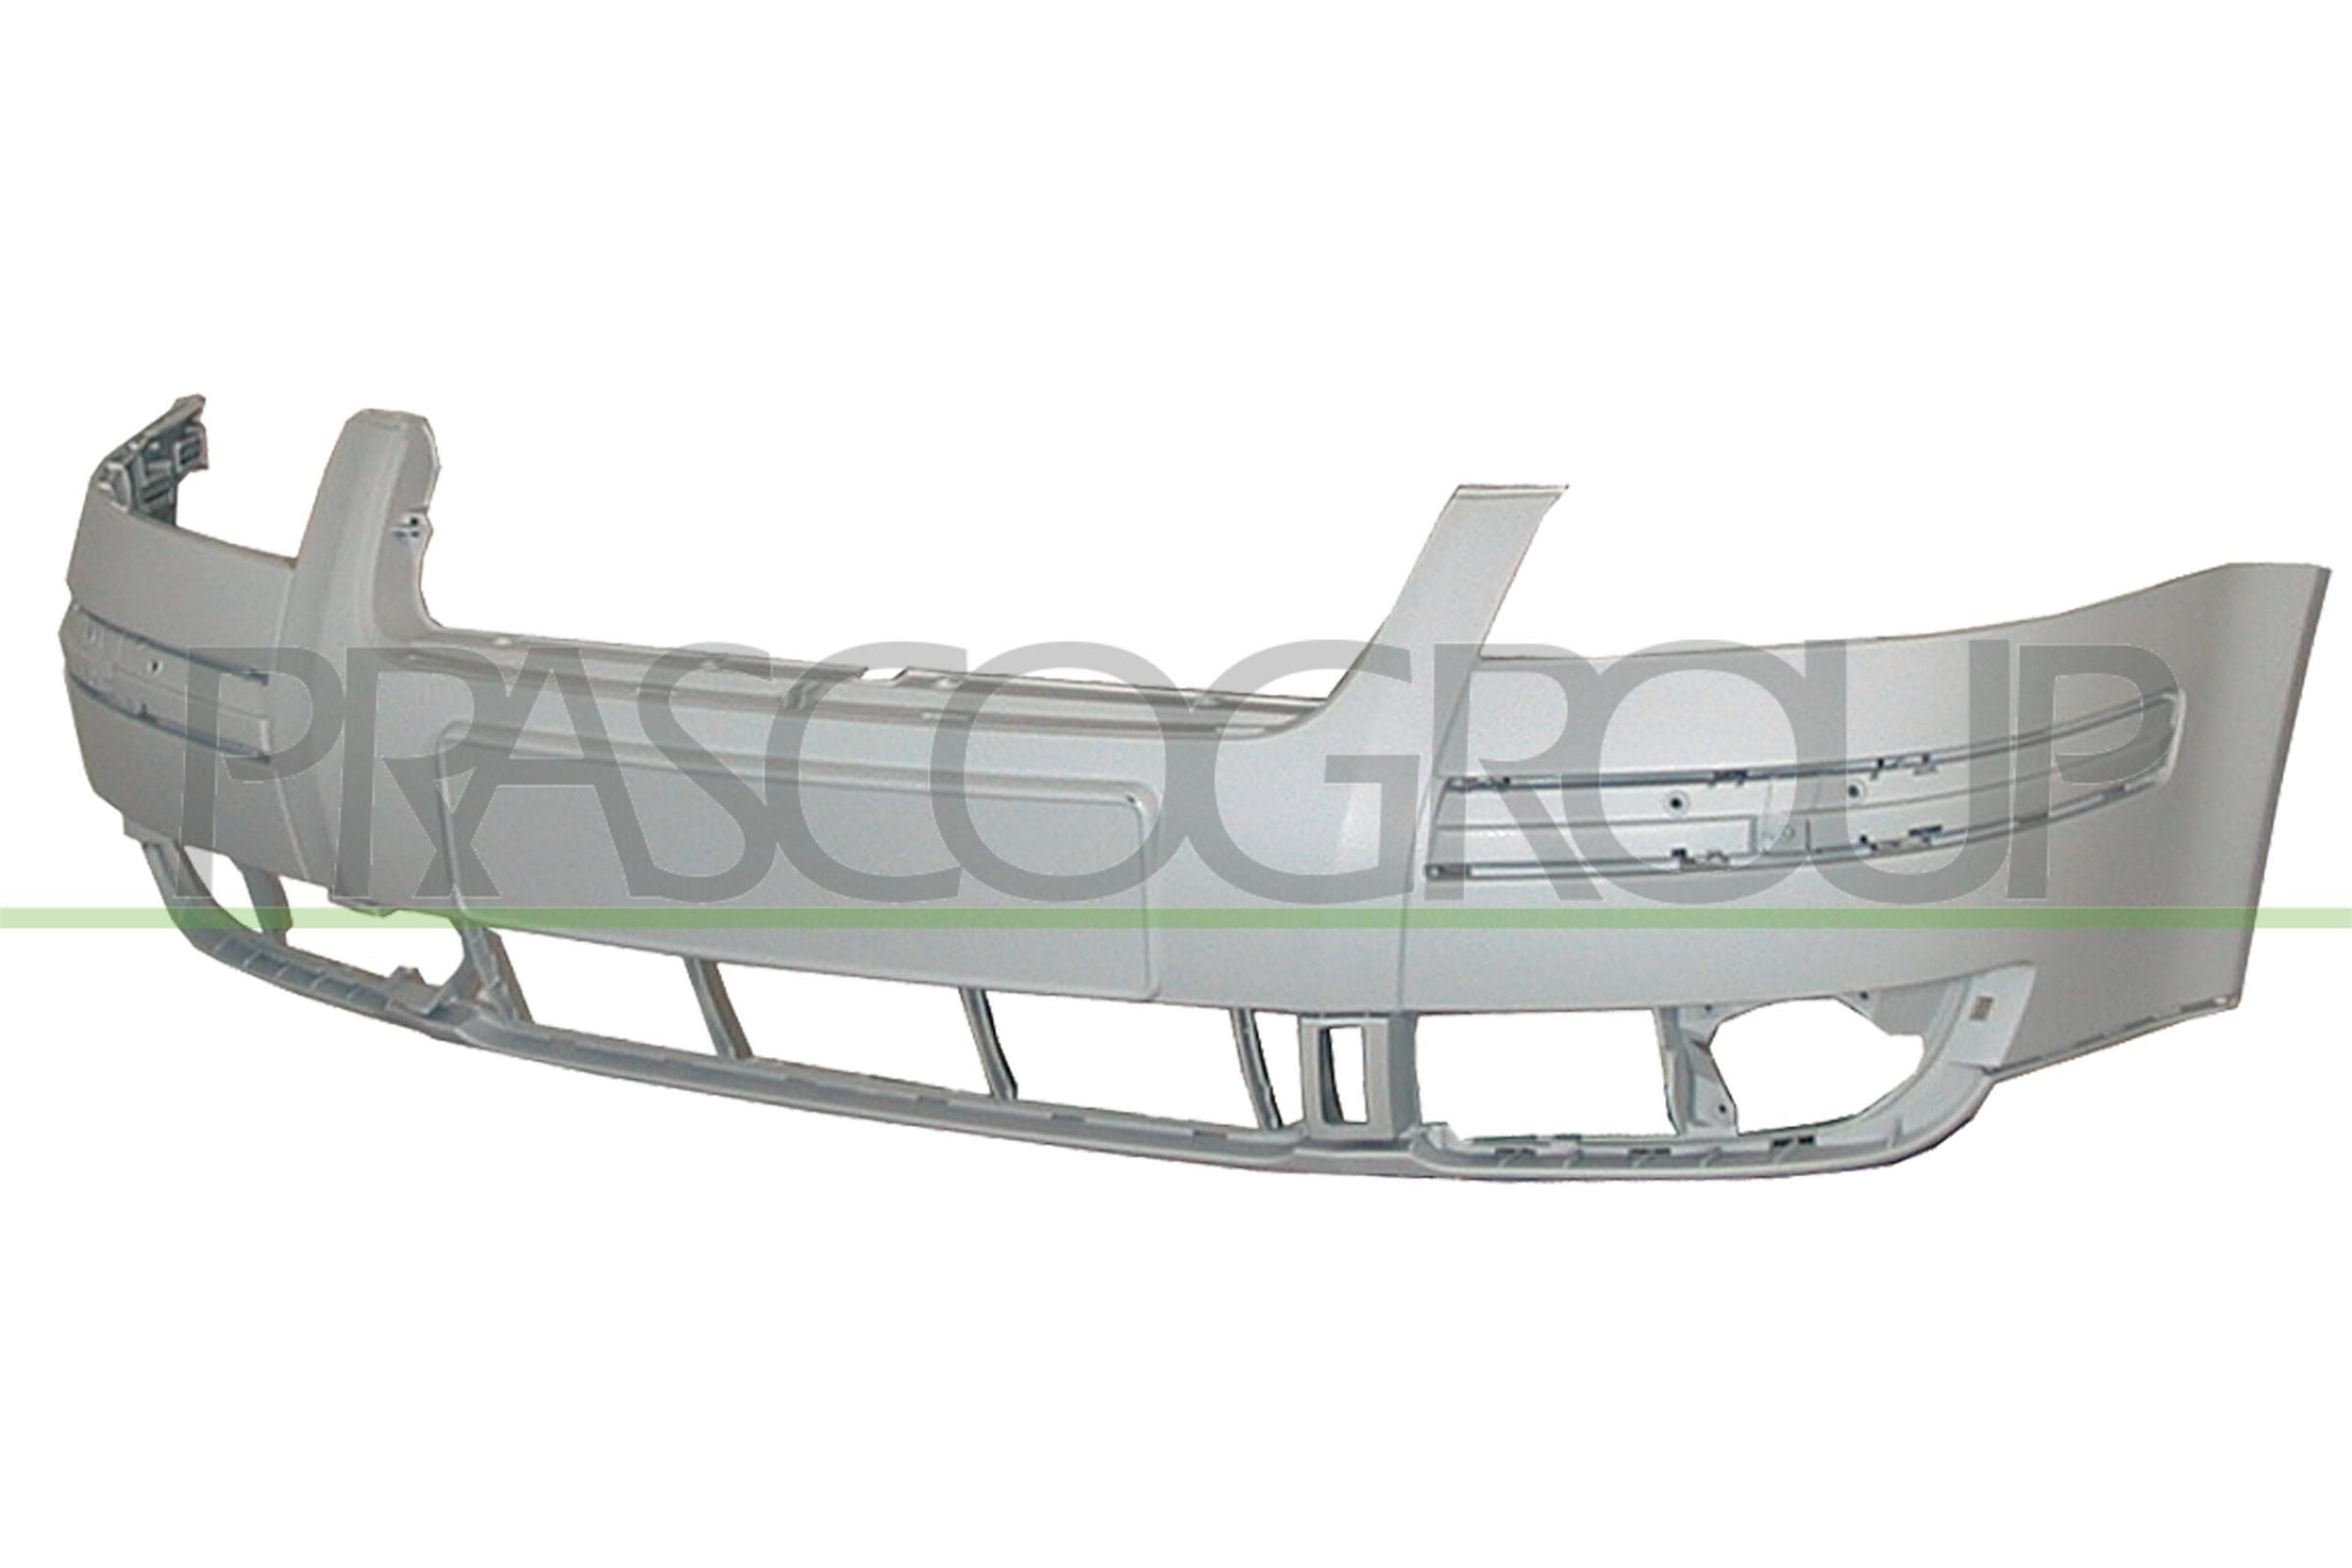 PRASCO Bumpers rear and front VW PASSAT Variant (3B6) new VG0531001